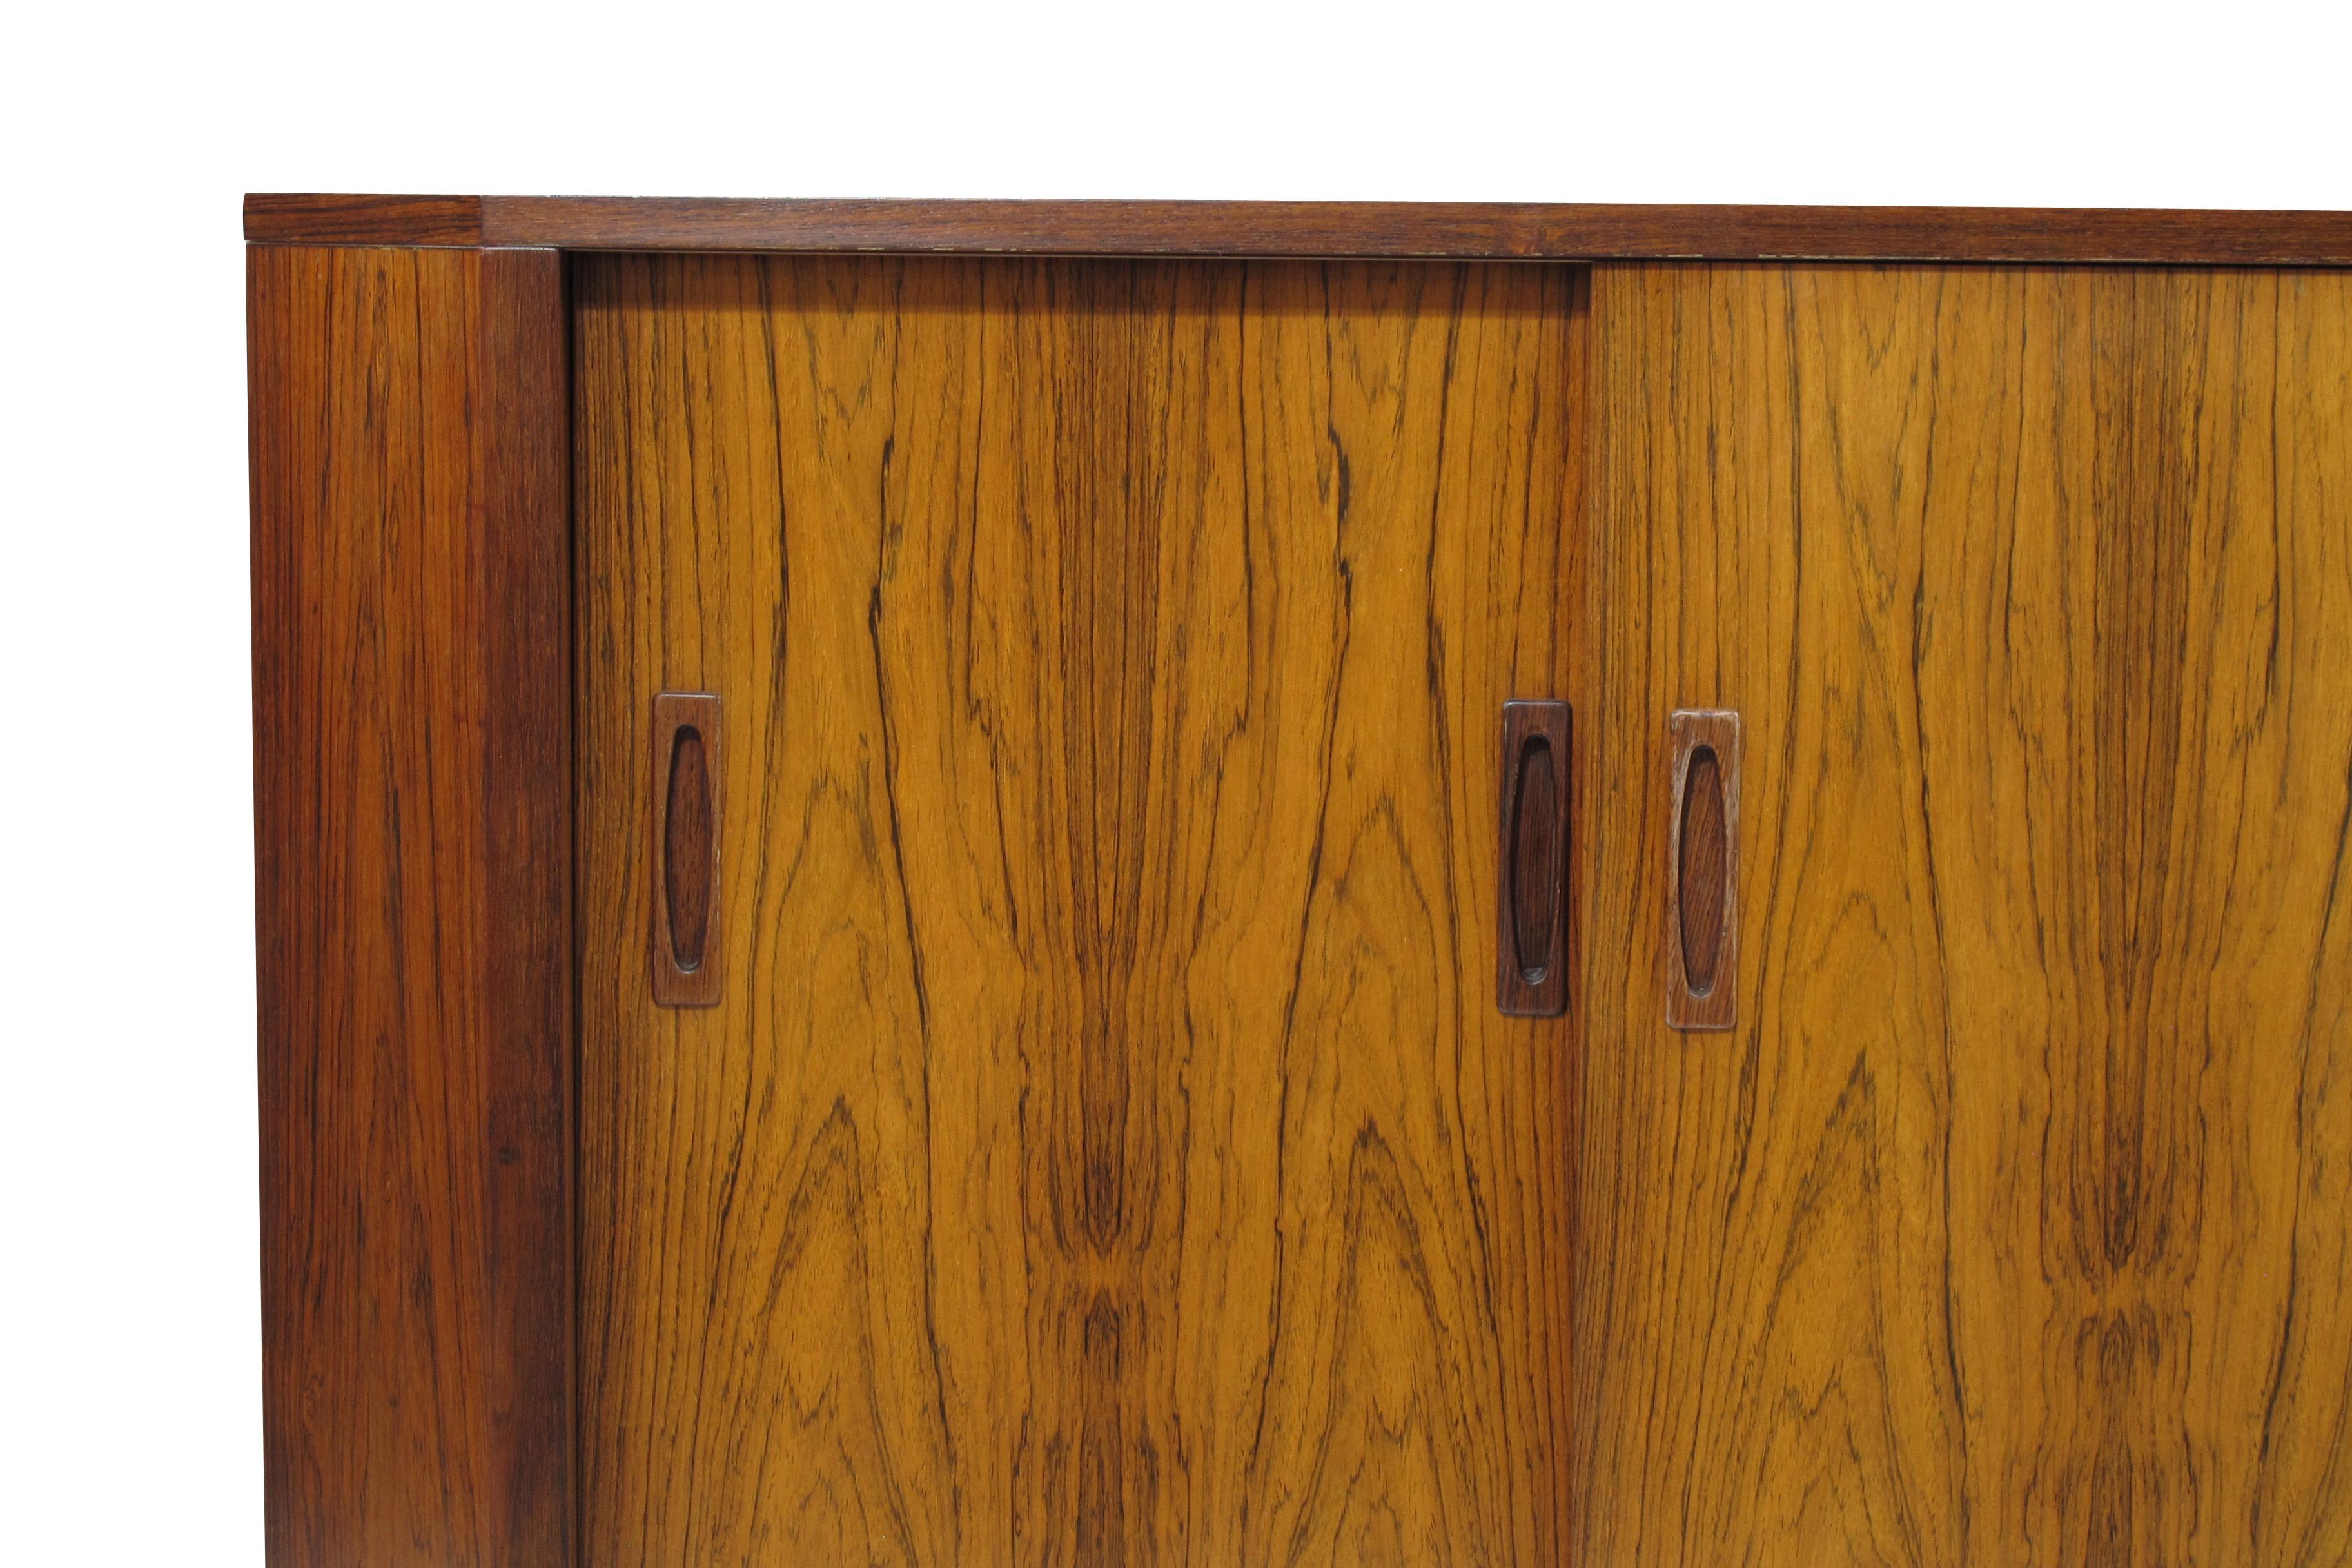 Midcentury low corner cabinet manufactured in Denmark. Cabinet crafted of rosewood with bookmatched grain and two sliding doors featuring carved inset pulls. Interior has two adjustable shelves. Fully restored. Leg clearance 9.63